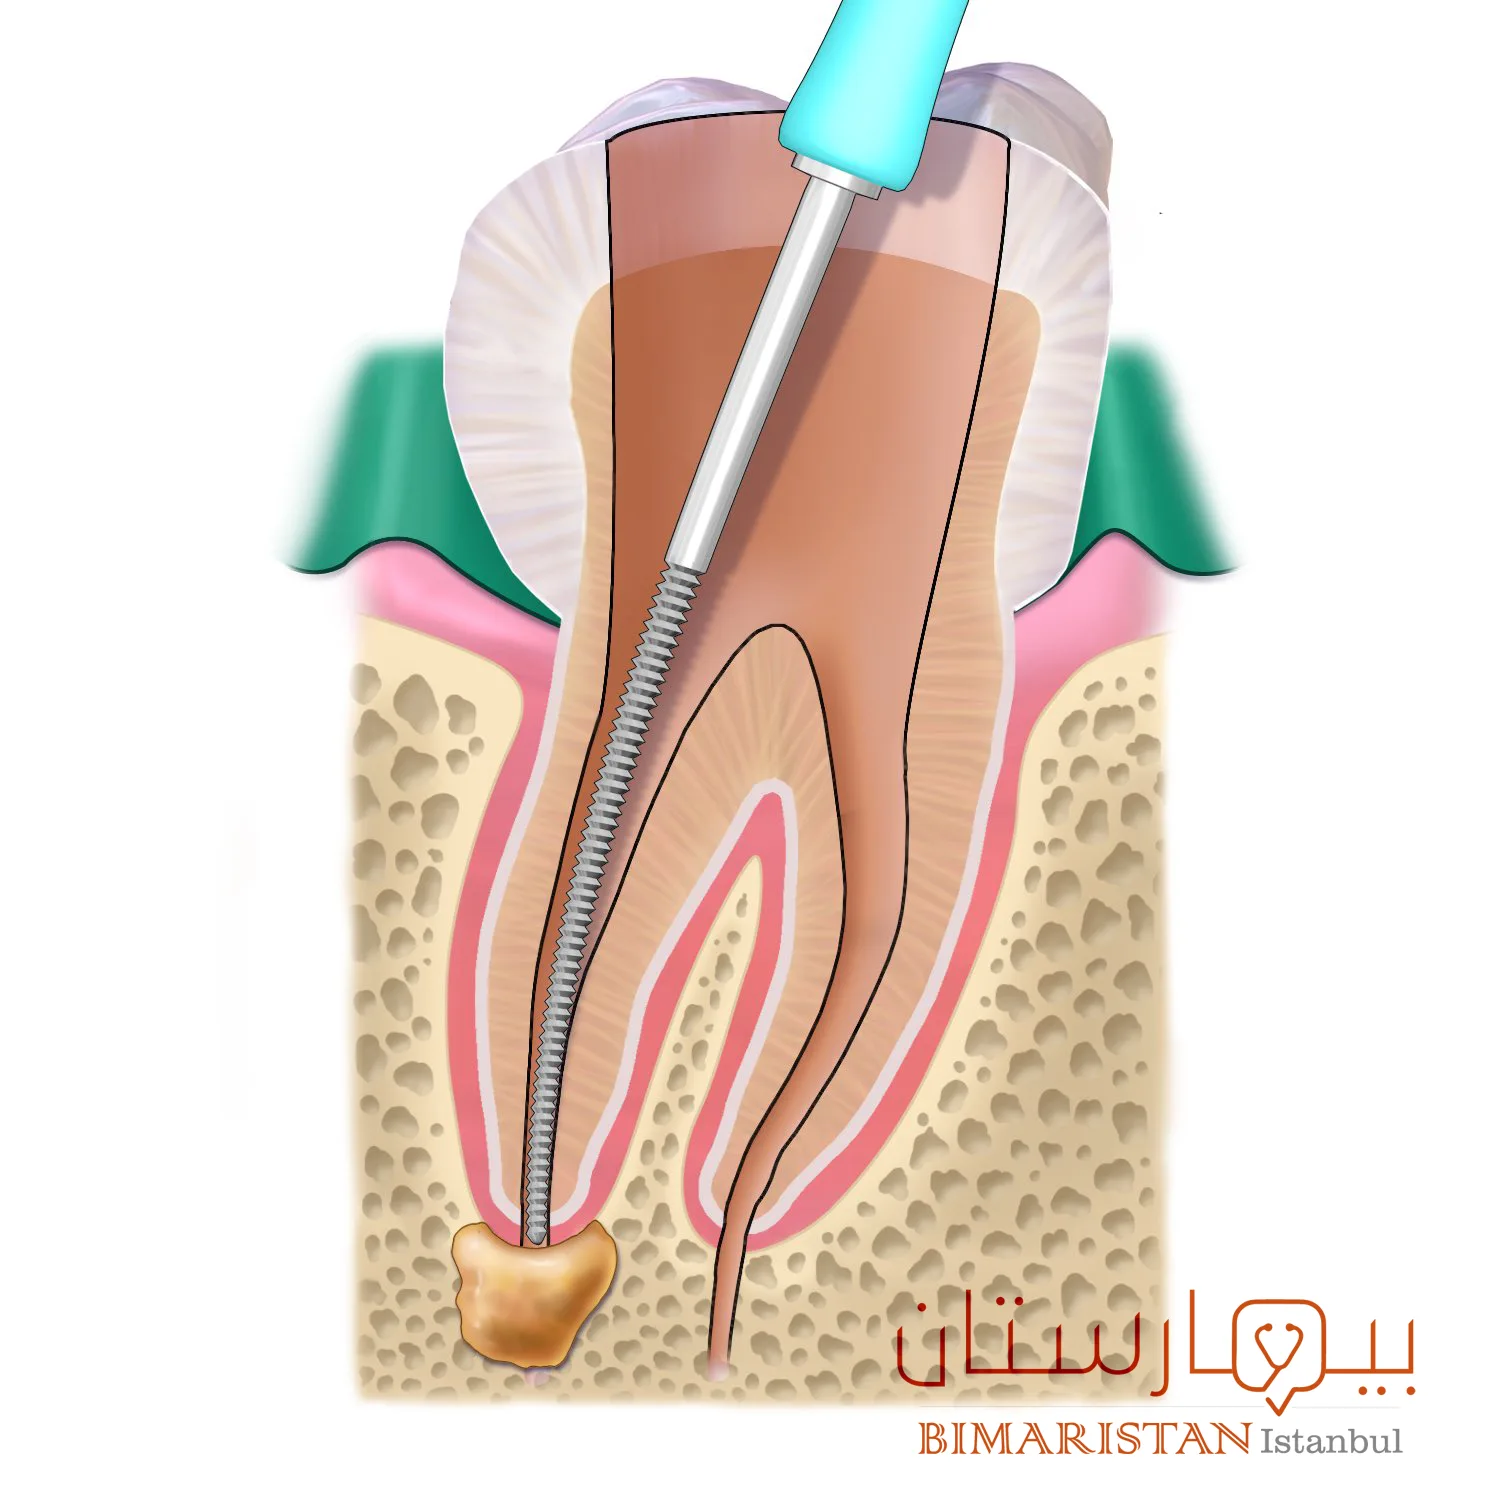 Cleaning the tooth canal with coolant